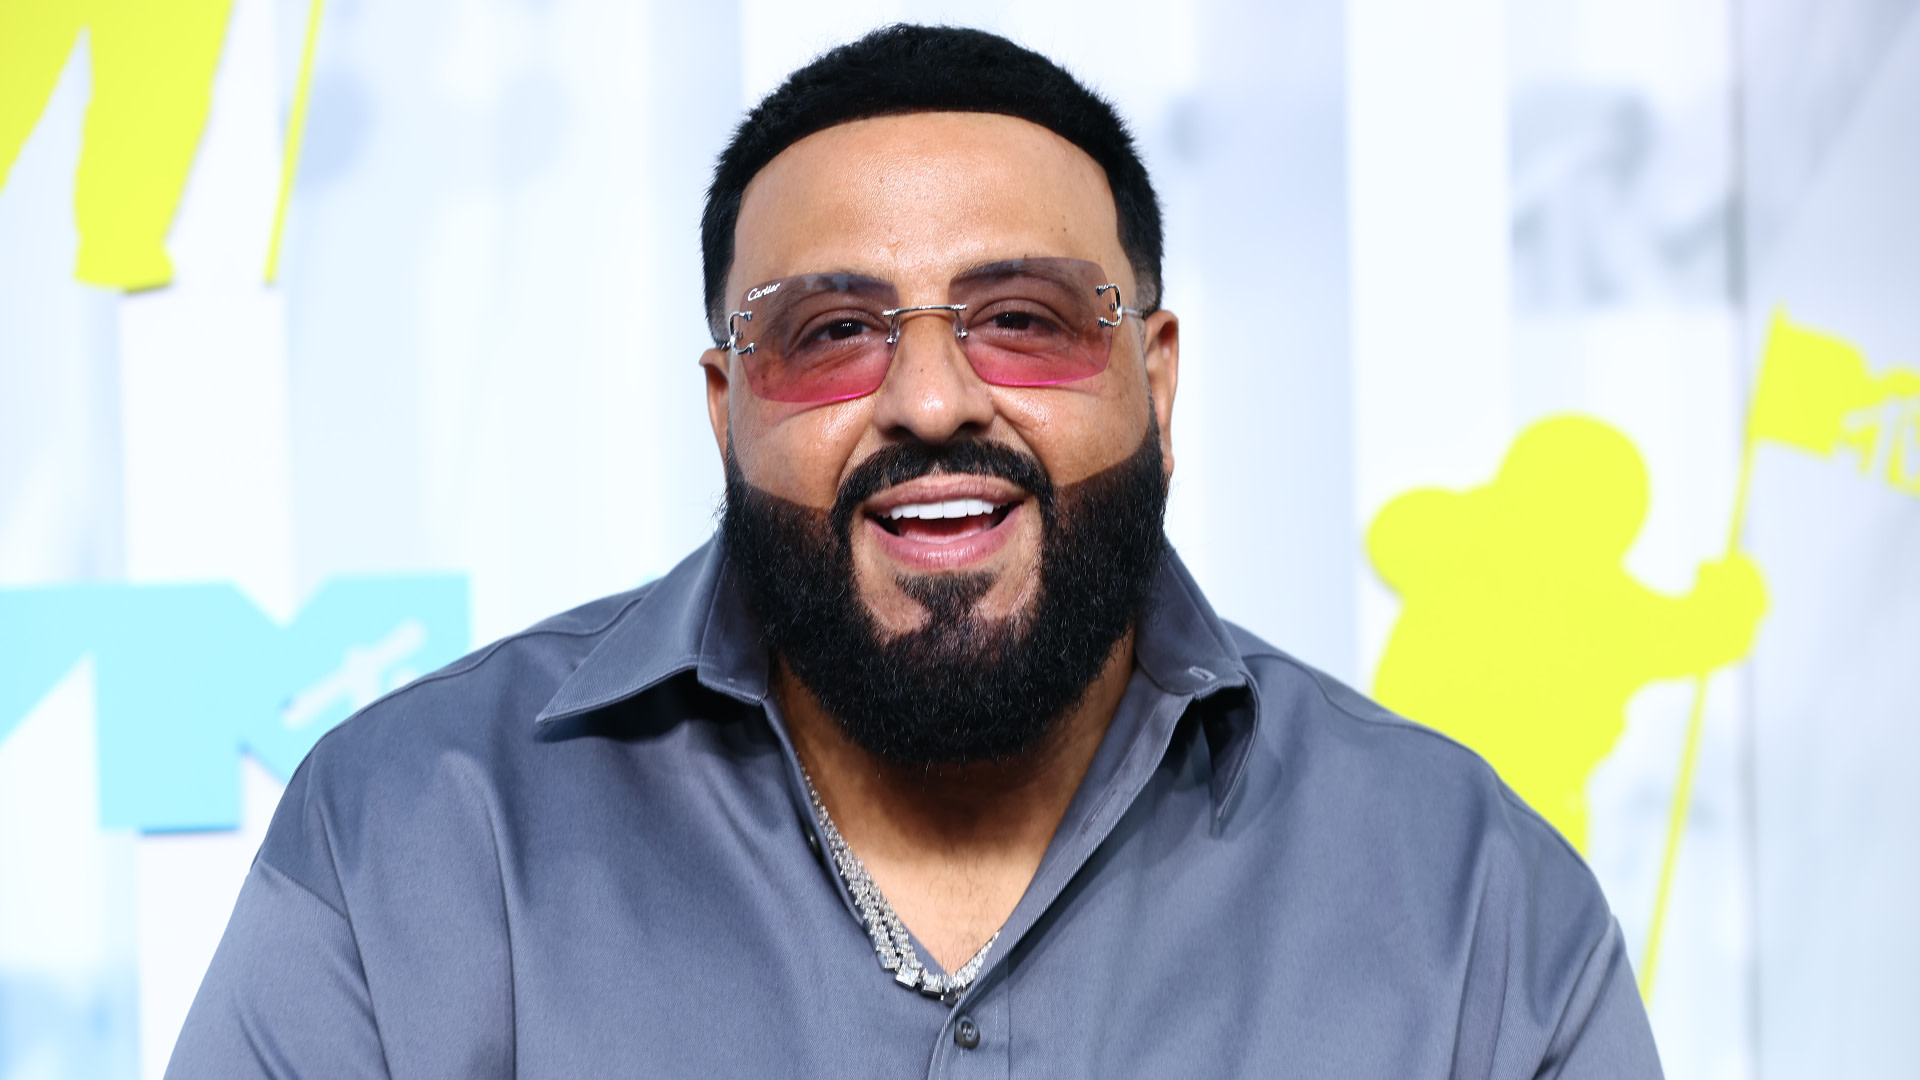 Here Are the First Week Numbers for DJ Khaled’s Album ‘God Did ...